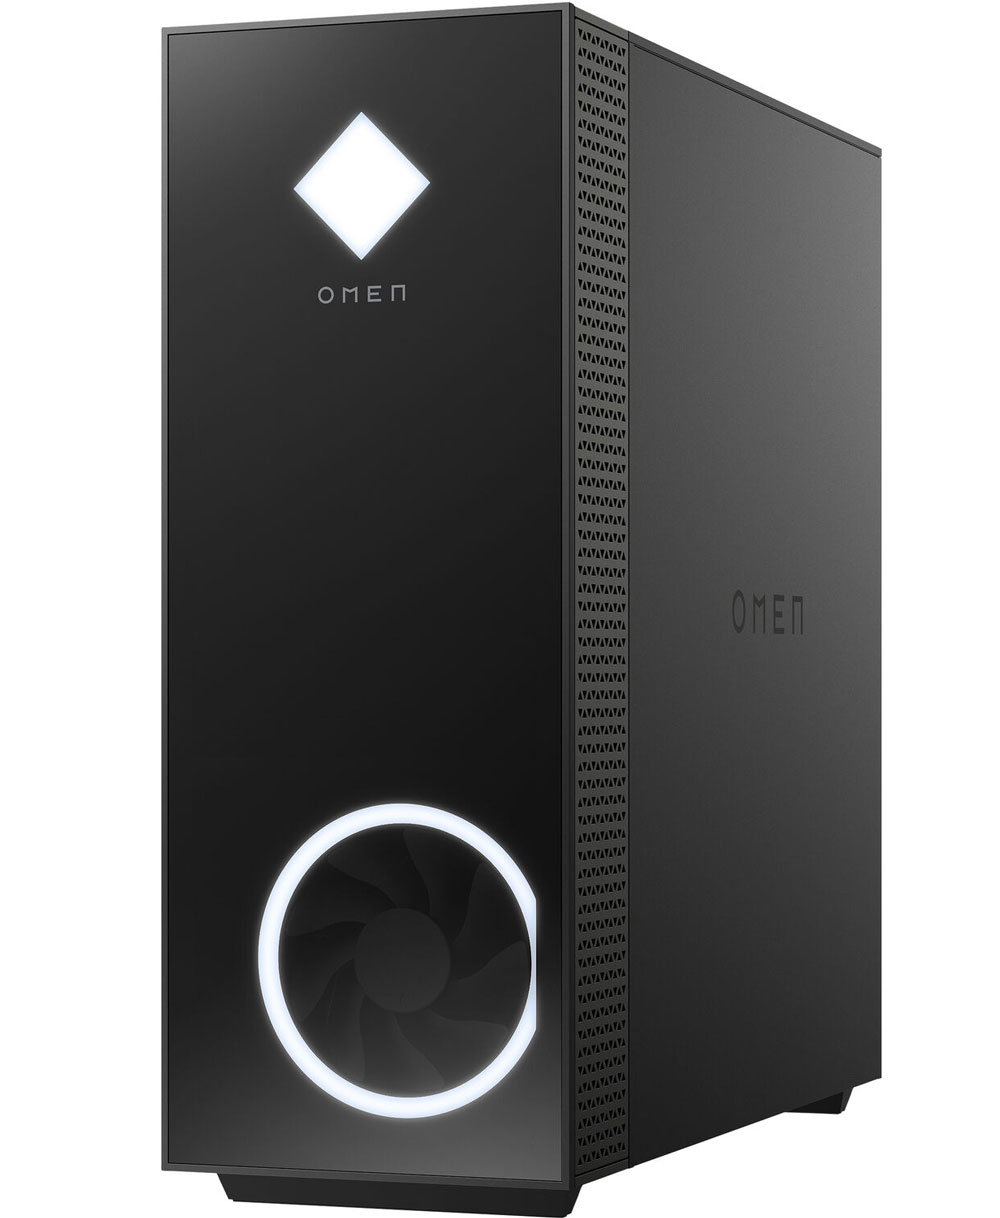 HP OMEN 30L Core i7 RTX 3080 Gaming Desktop PC With 2TB SSD